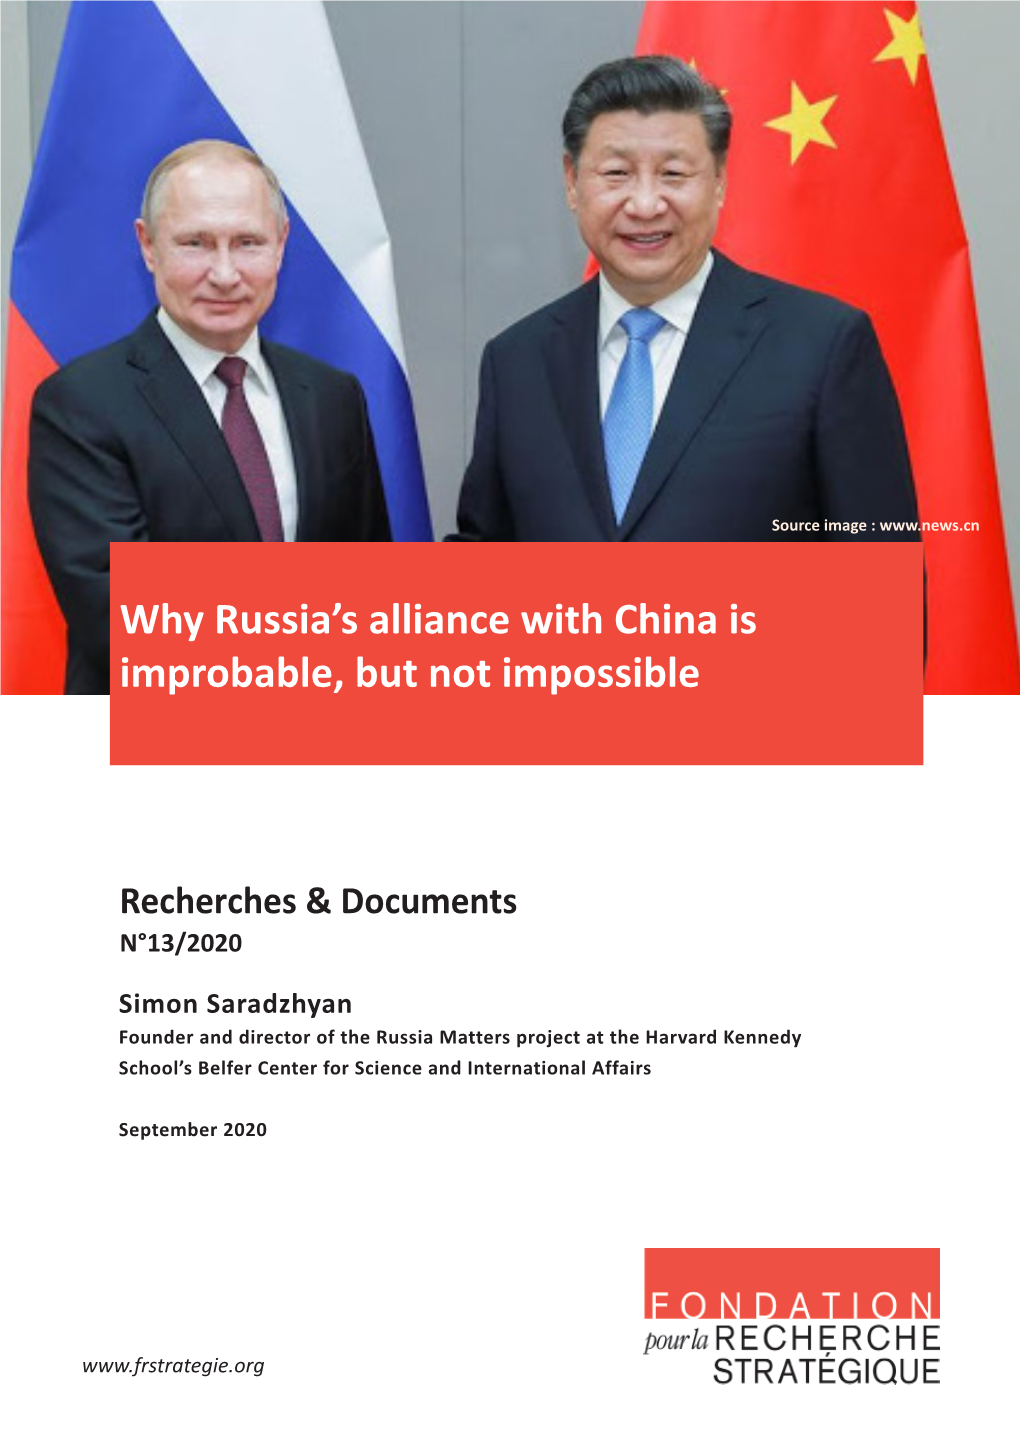 Why Russia's Alliance with China Is Improbable, but Not Impossible